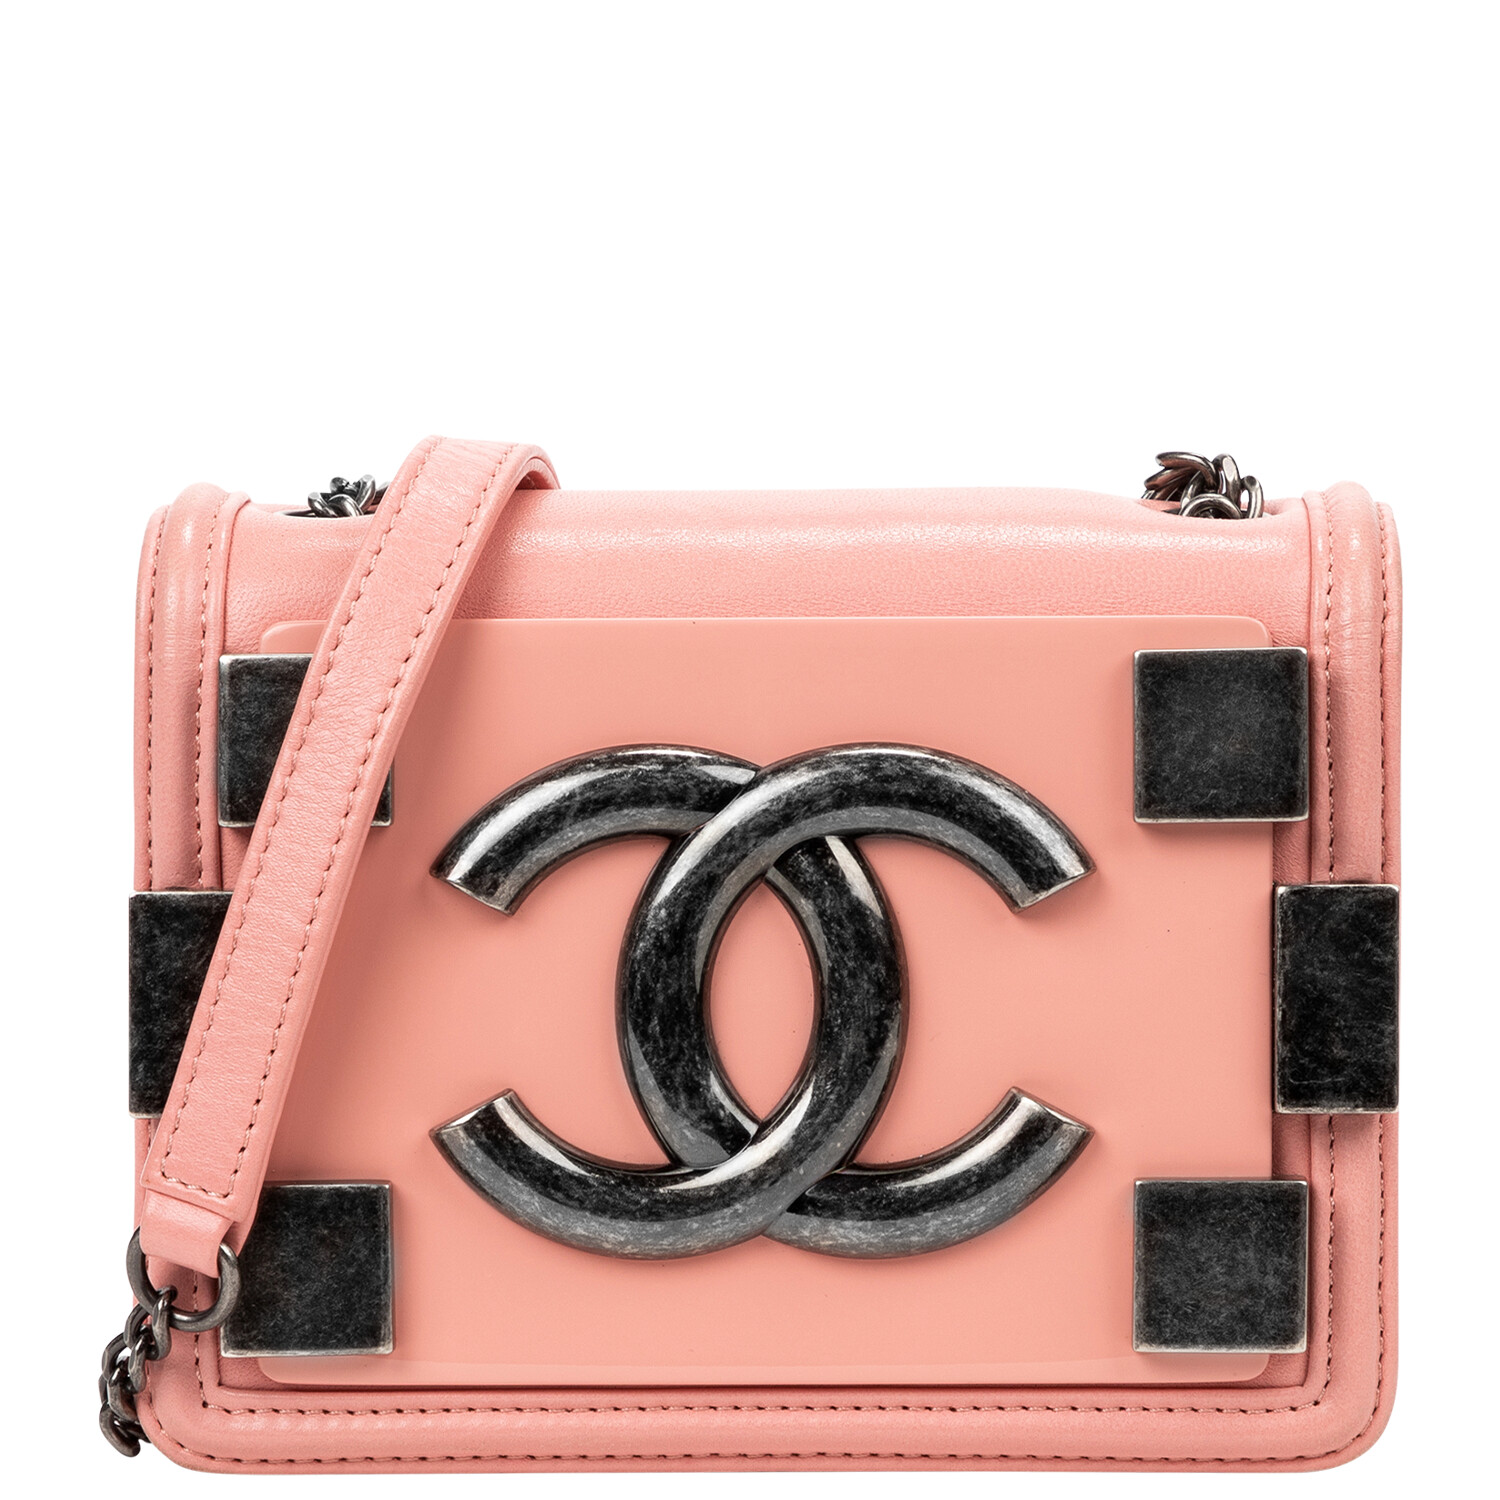 Chanel Limited Edition 2014 Runway Rose CC Flap Bag